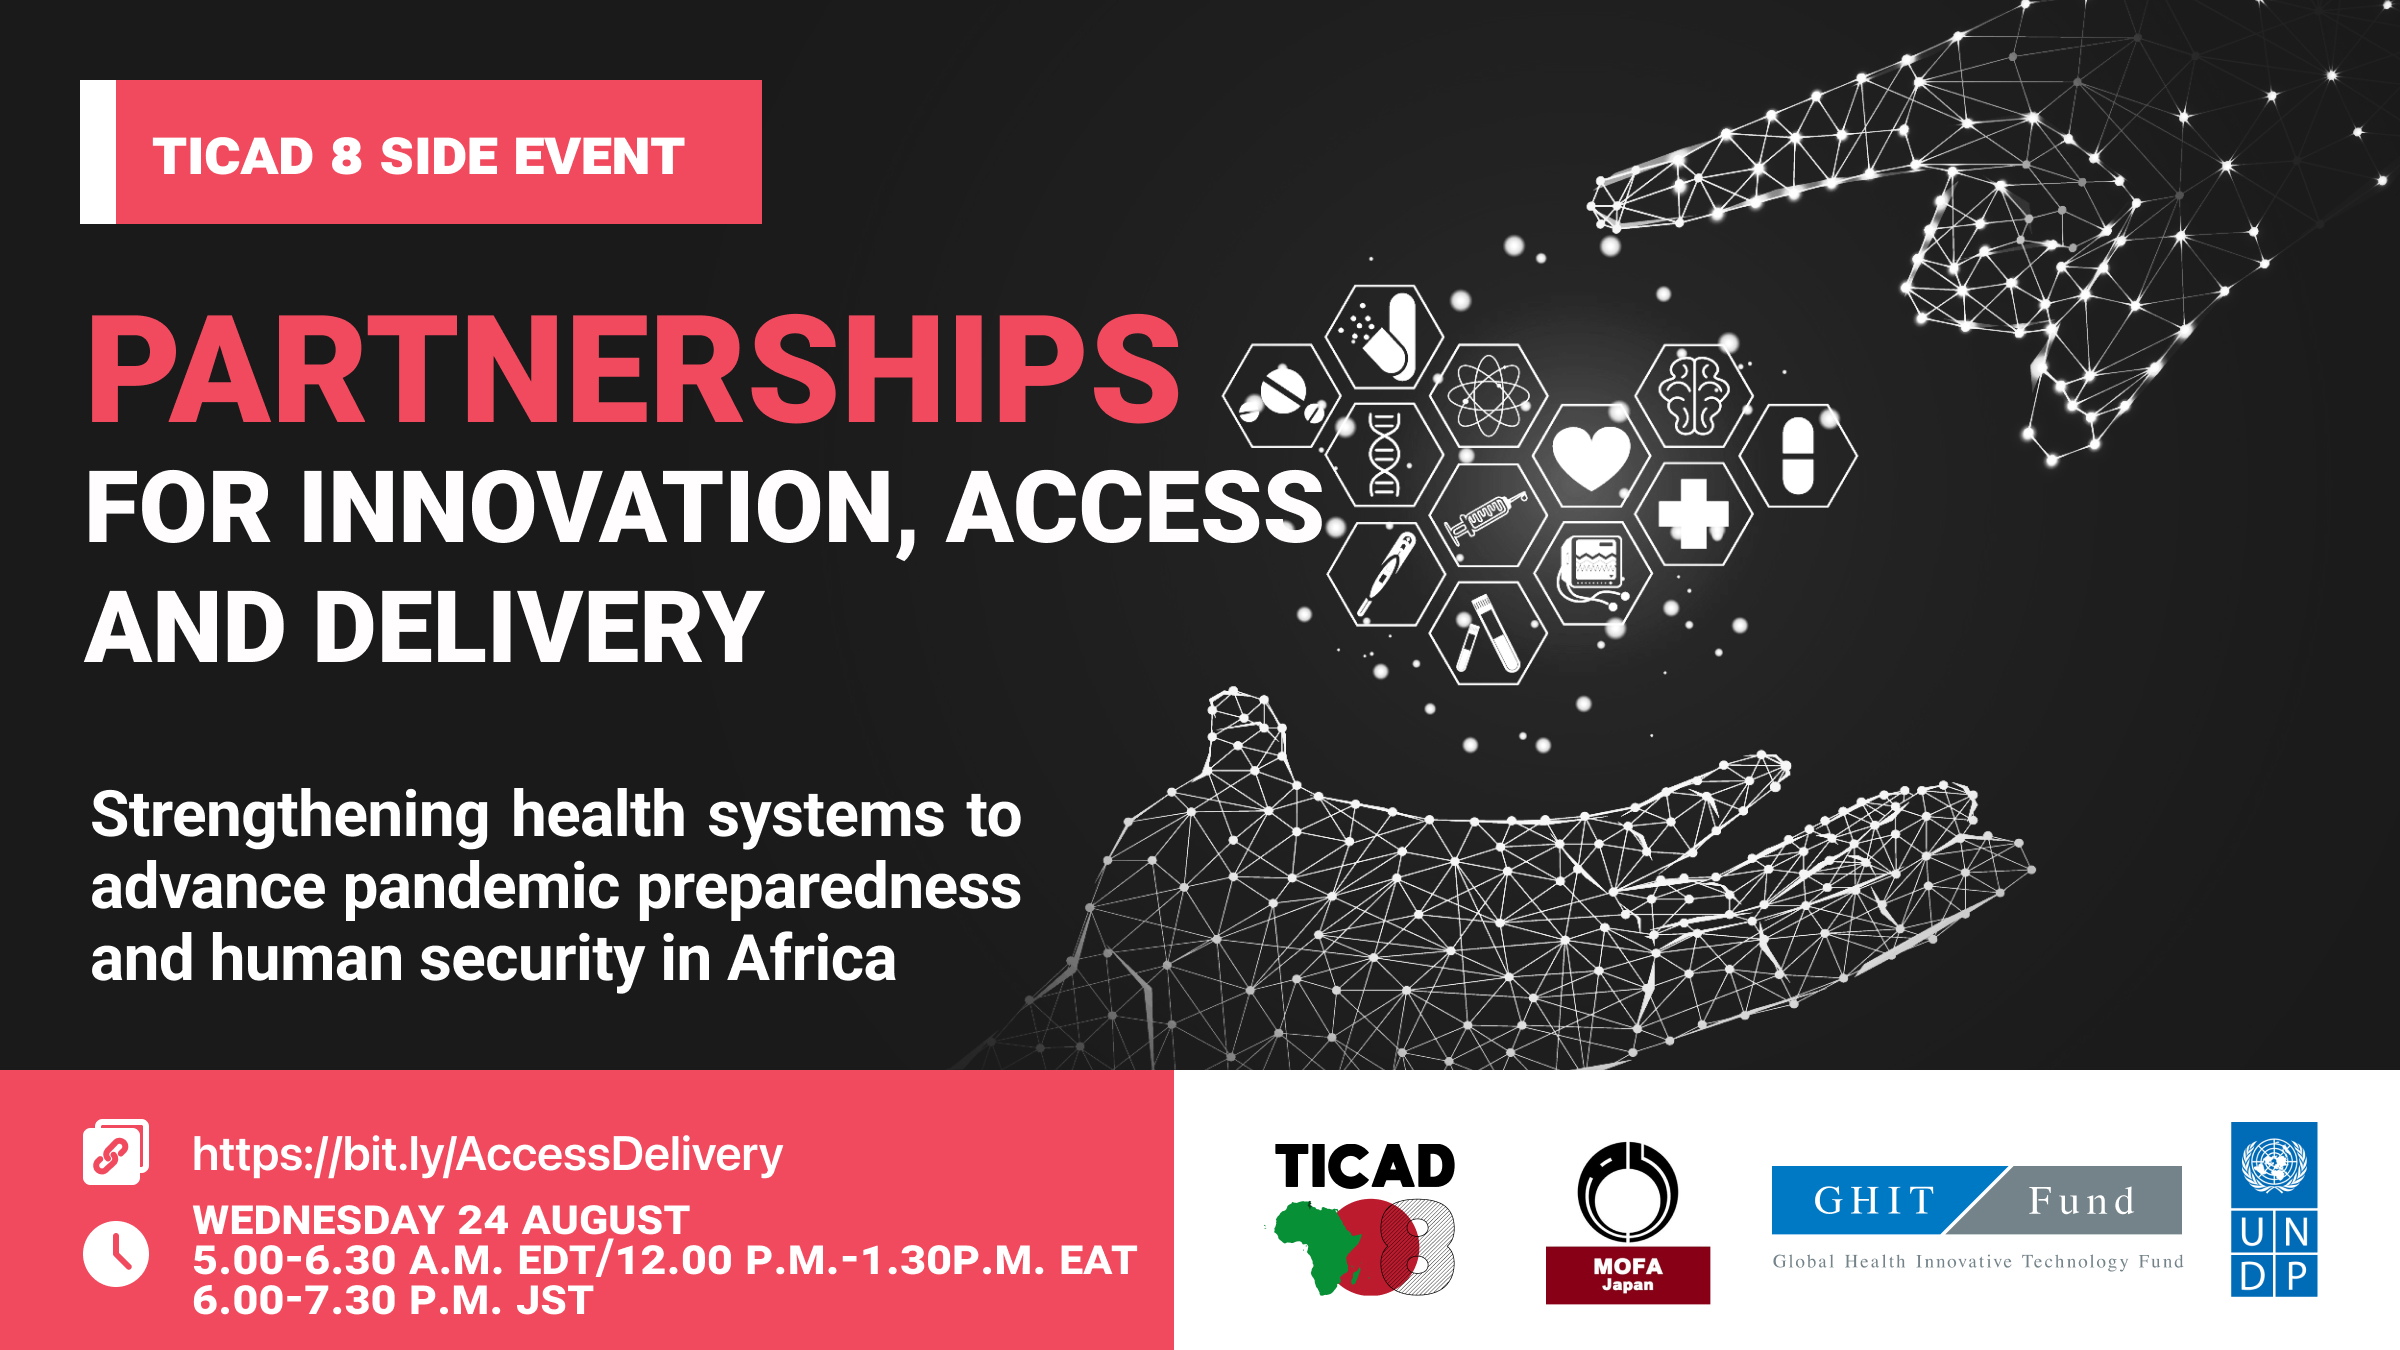 ticad8 side event on partnerships